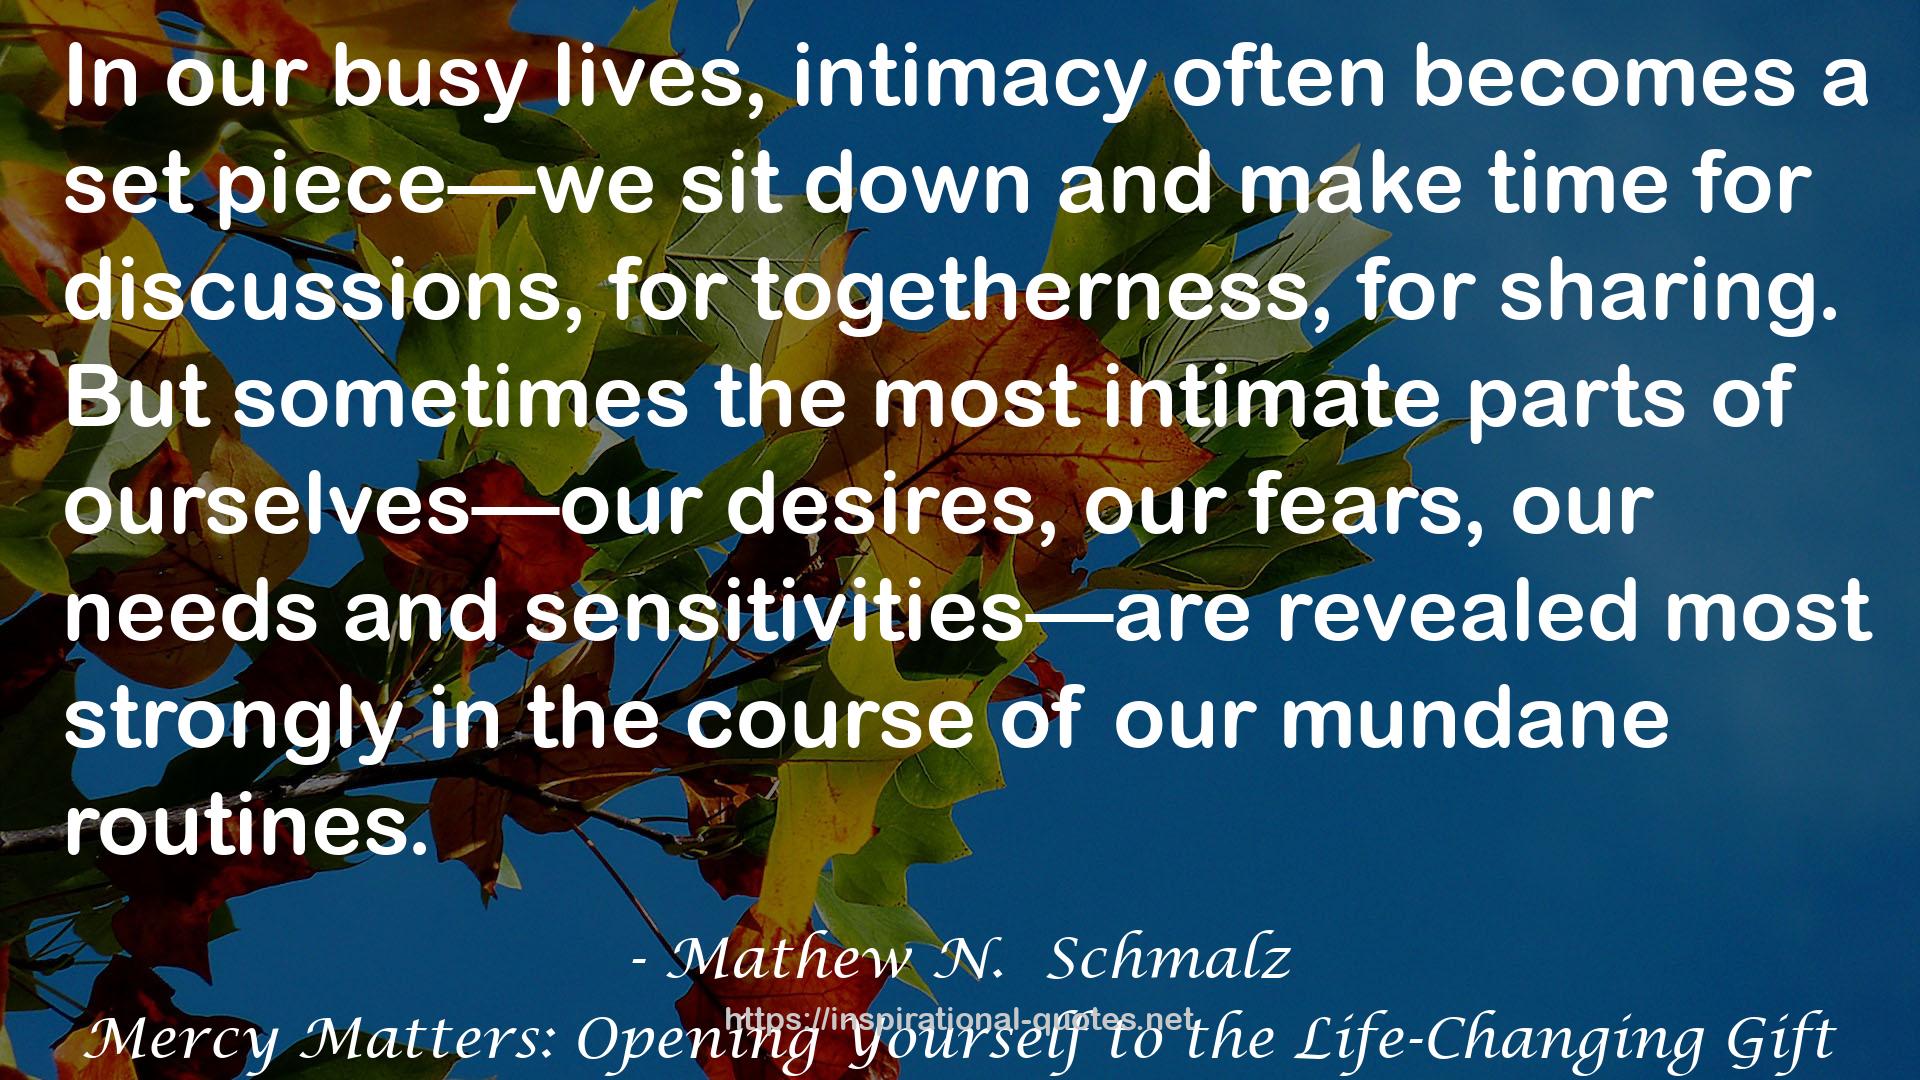 Mercy Matters: Opening Yourself to the Life-Changing Gift QUOTES